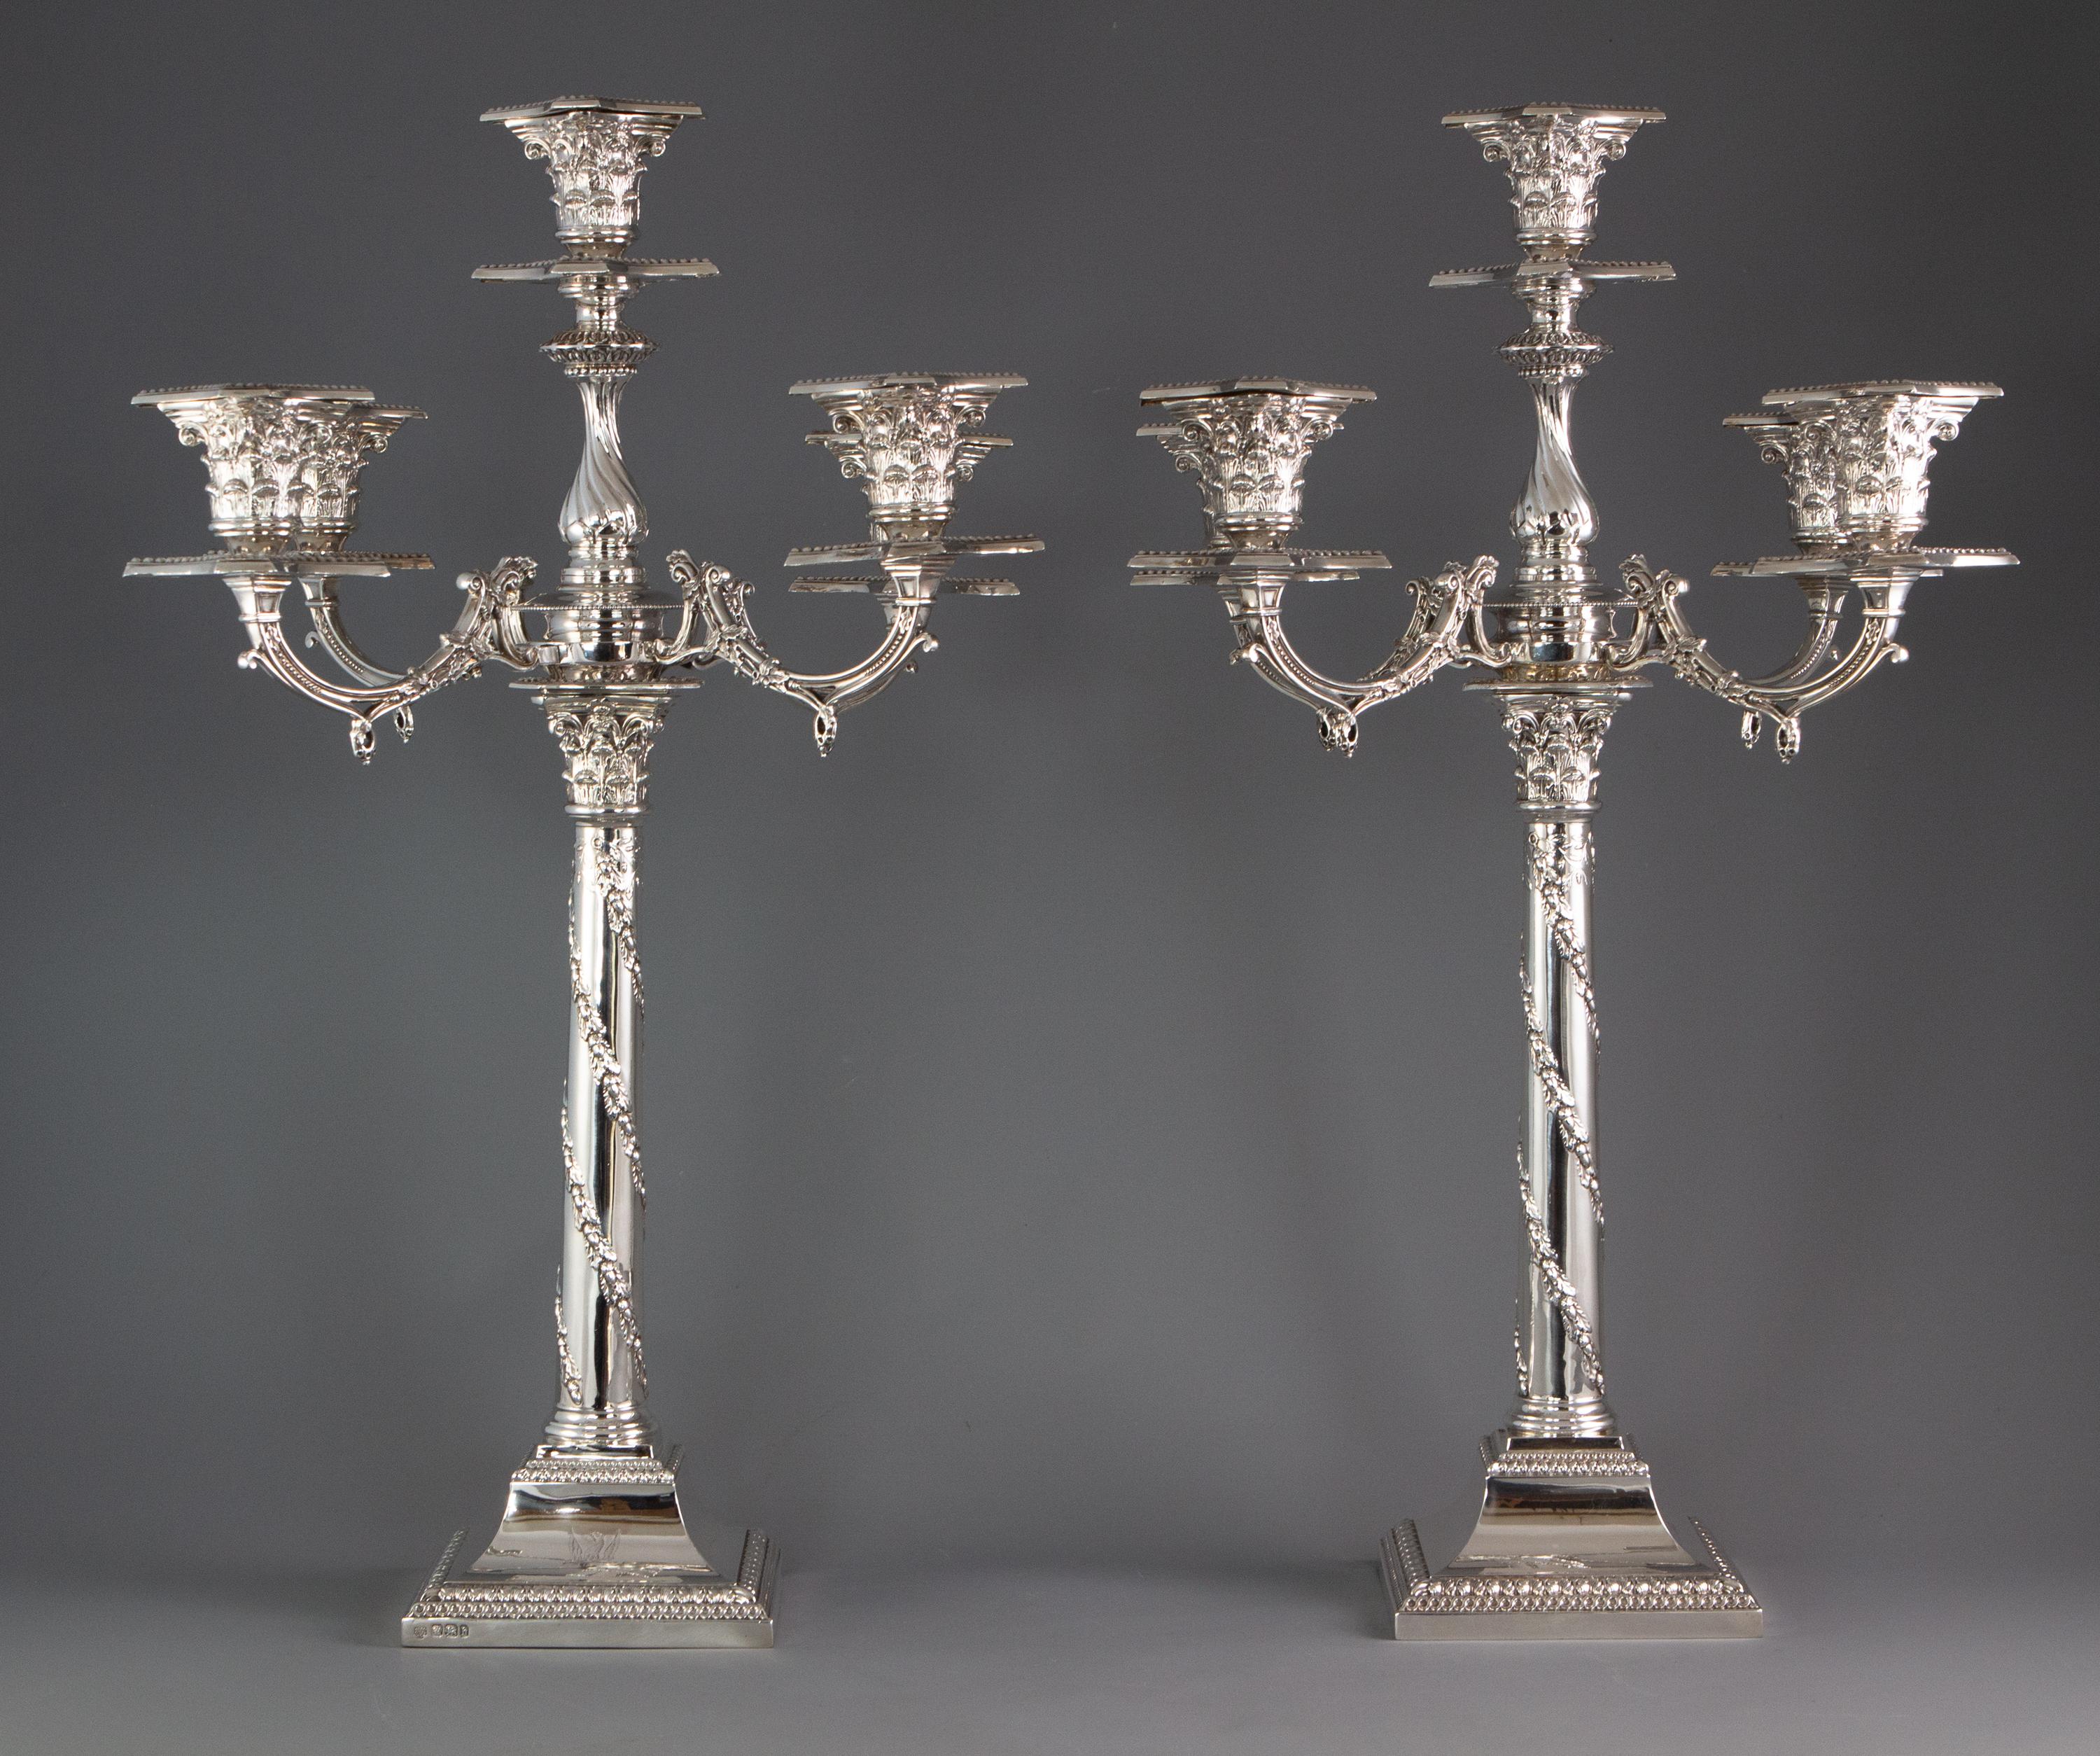 An impressive pair of five light Victorian silver candelabra Sheffield 1894

An extremely good pair of five light Victorian silver candelabra of classical form. The sticks rise from a moulded square section beaded and leaf bordered base to a plain